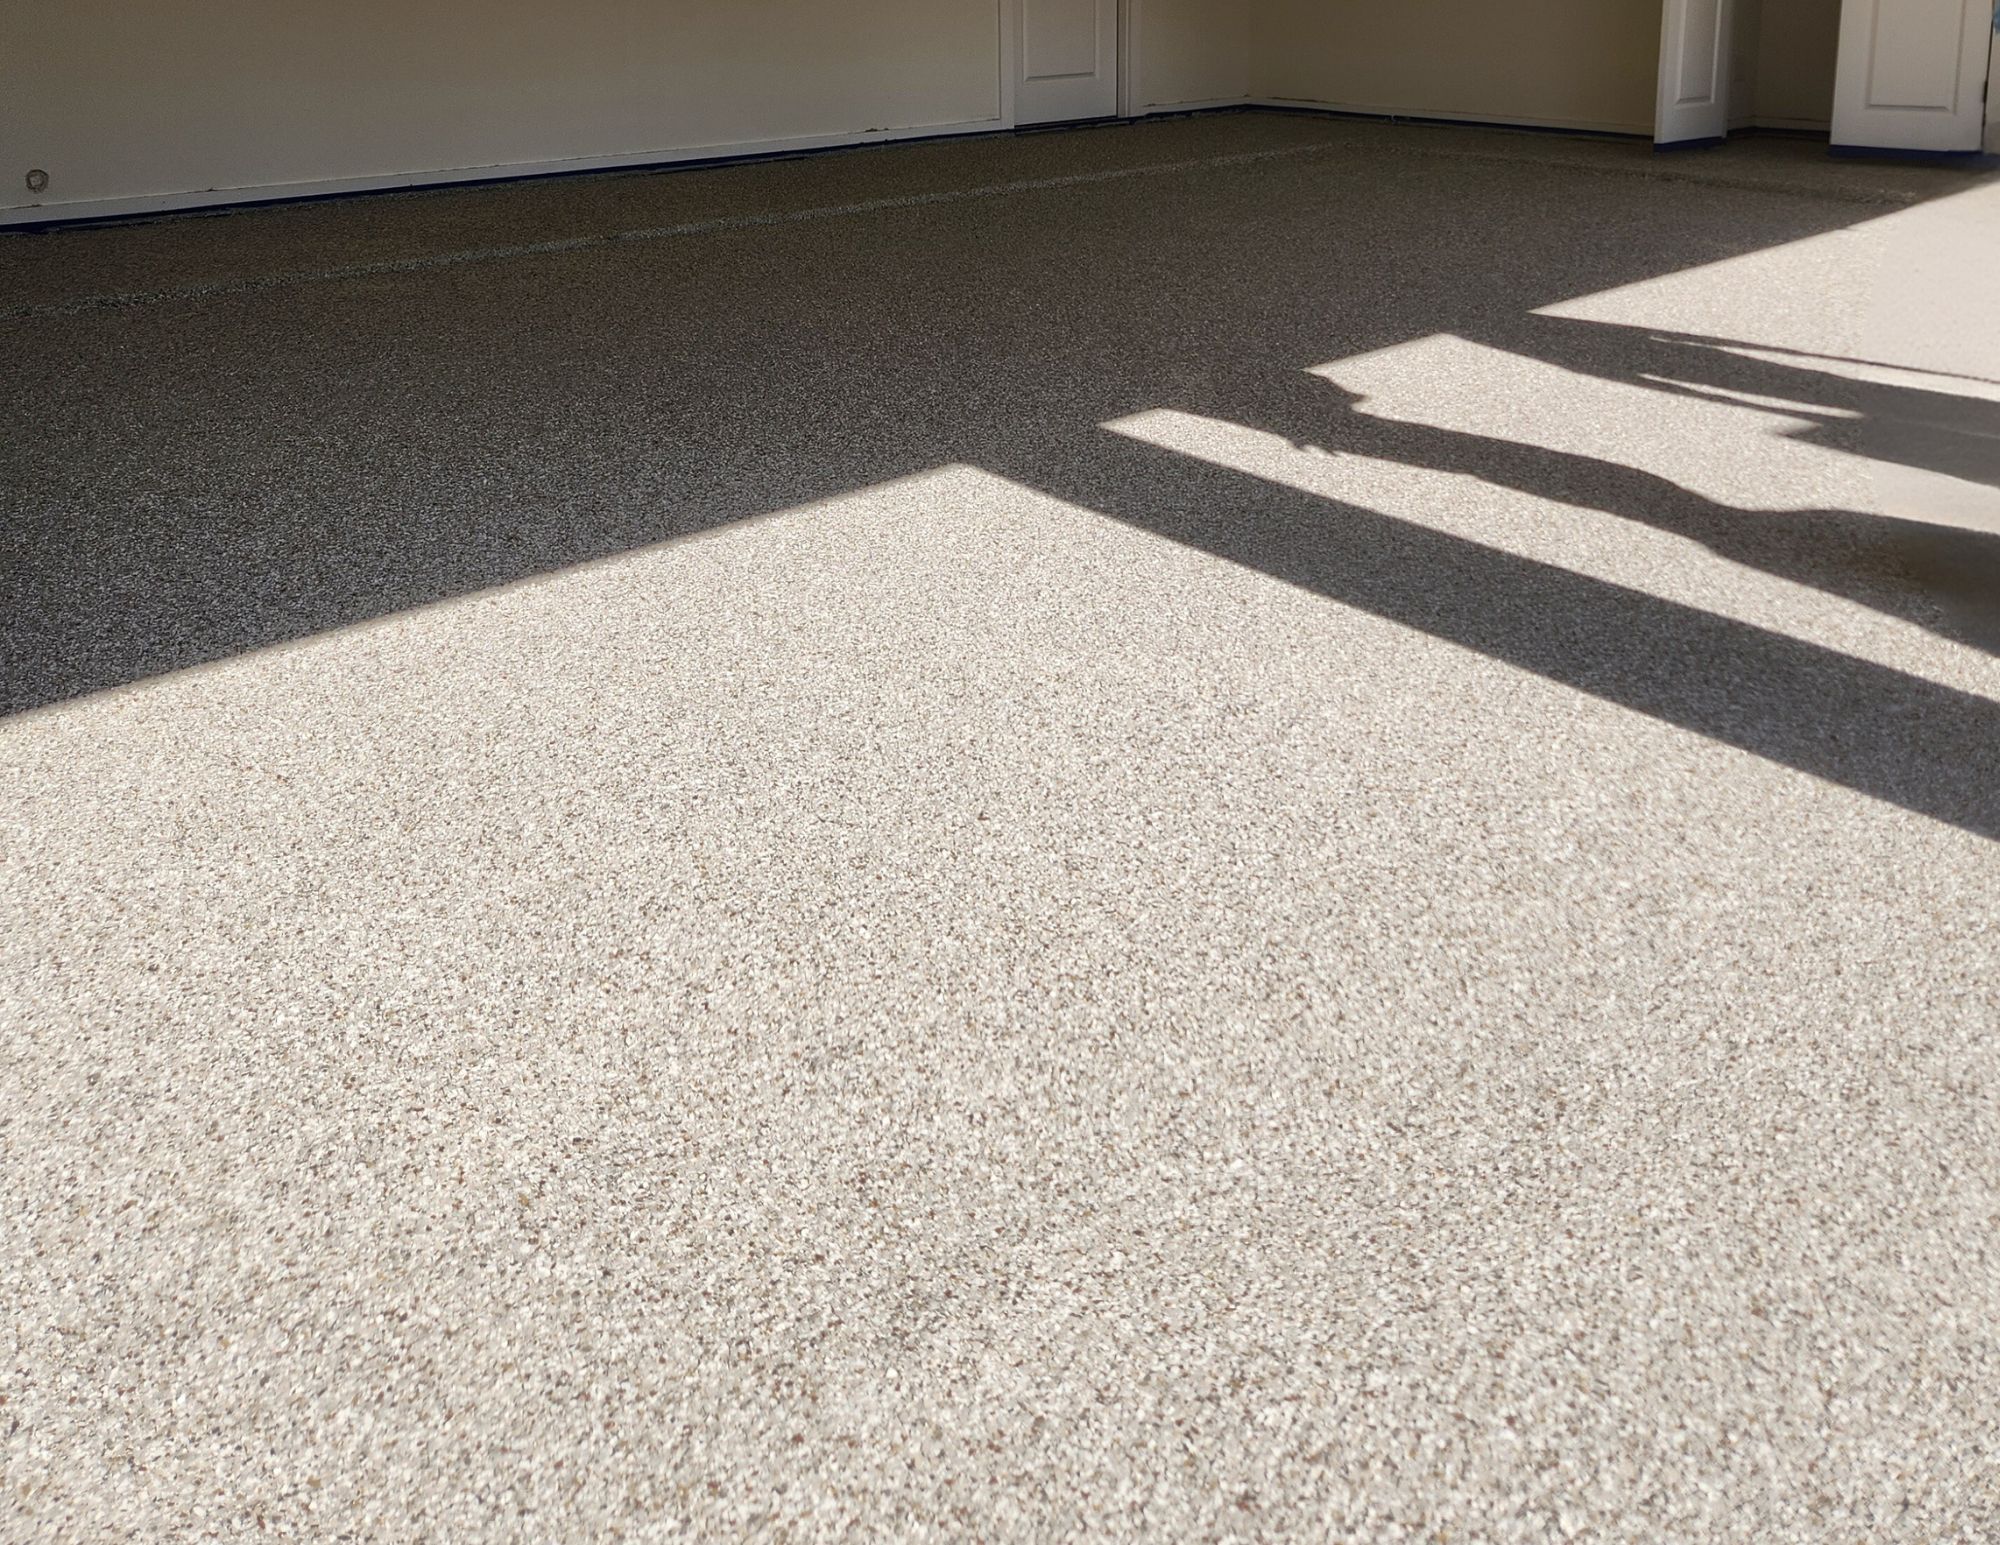 a Close-up of a Garage Floor with a Fresh Polyaspartic Coating, Showcasing a Seamless and Resilient Surface. - Finished Polyaspartic Floor Coating